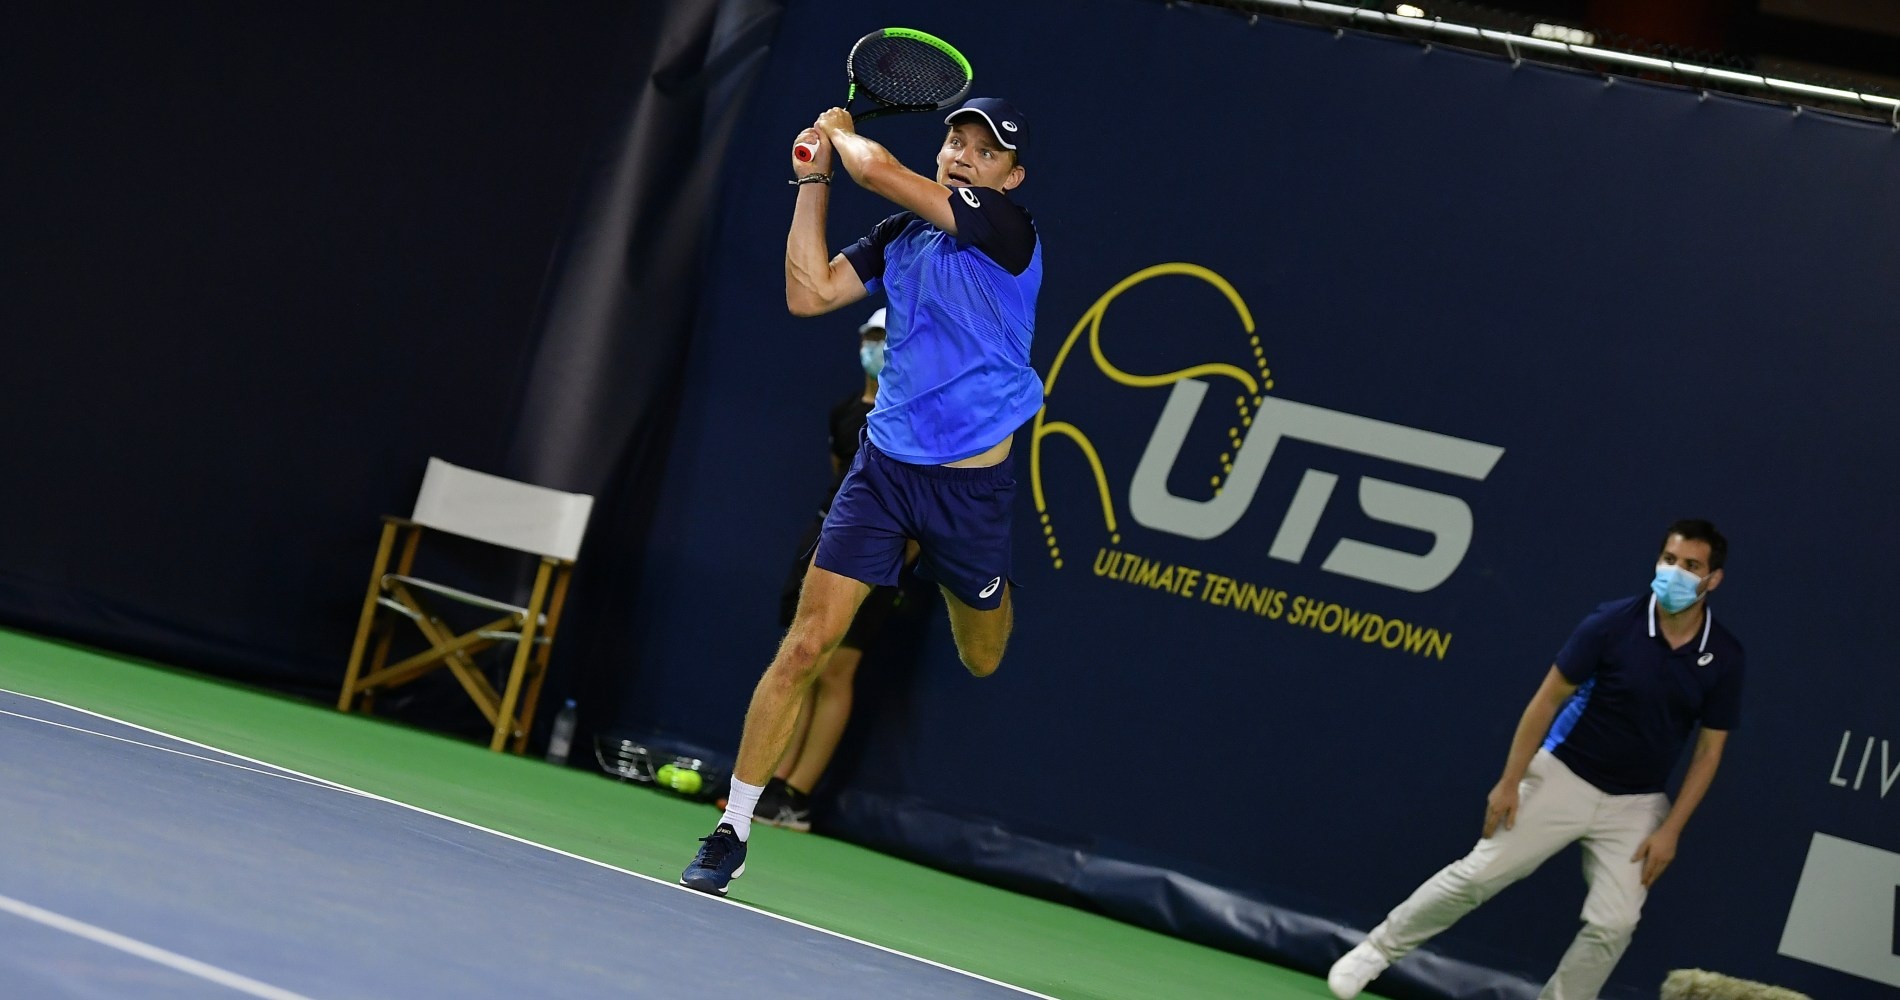 UTS Calm Goffin clinches Final 4 spot with win over Paire